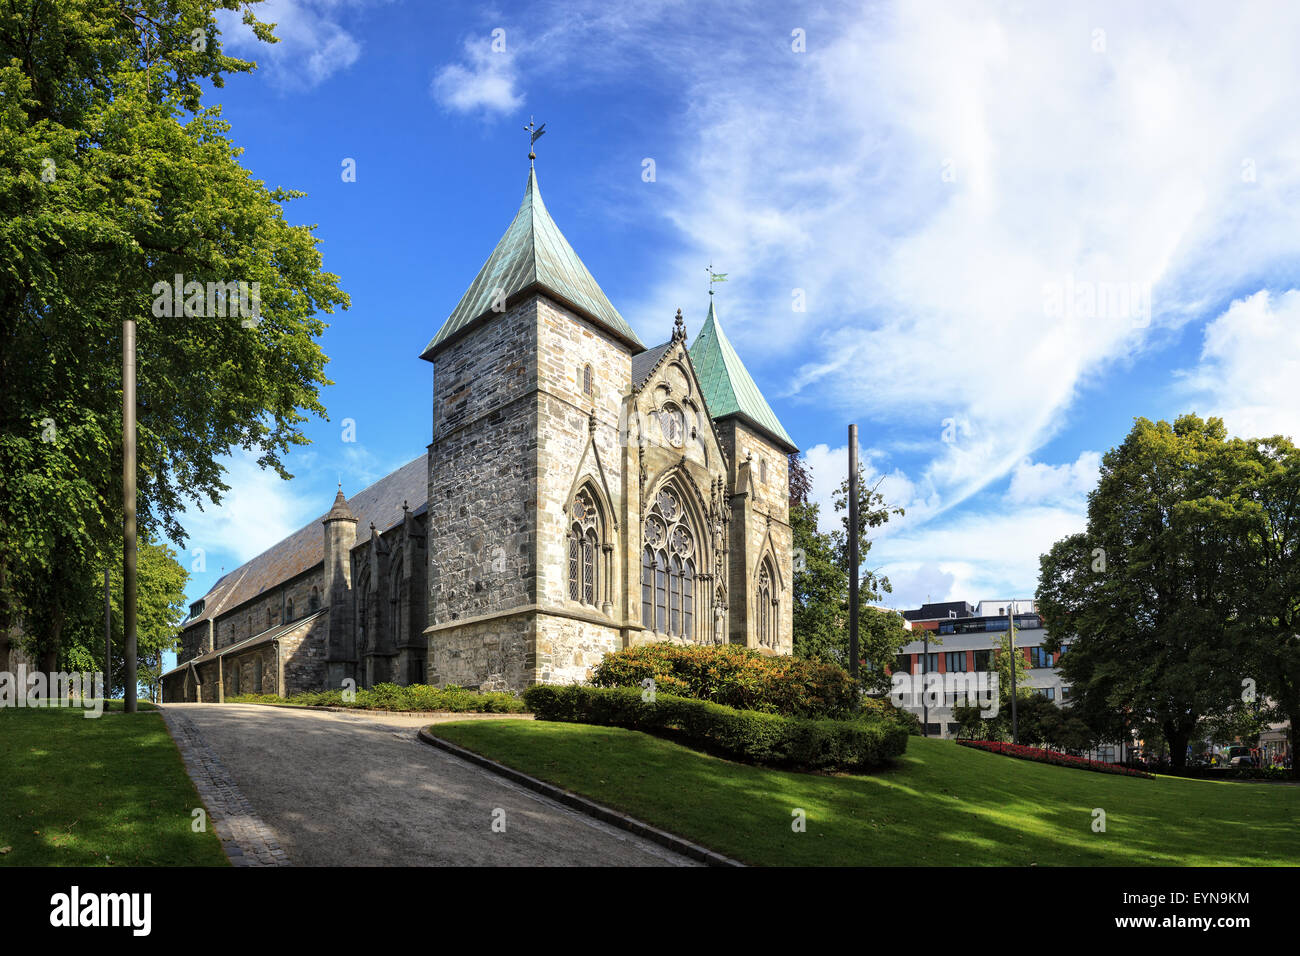 Famous Stavanger Domkirke one of the oldest churches in Norway. Stock Photo